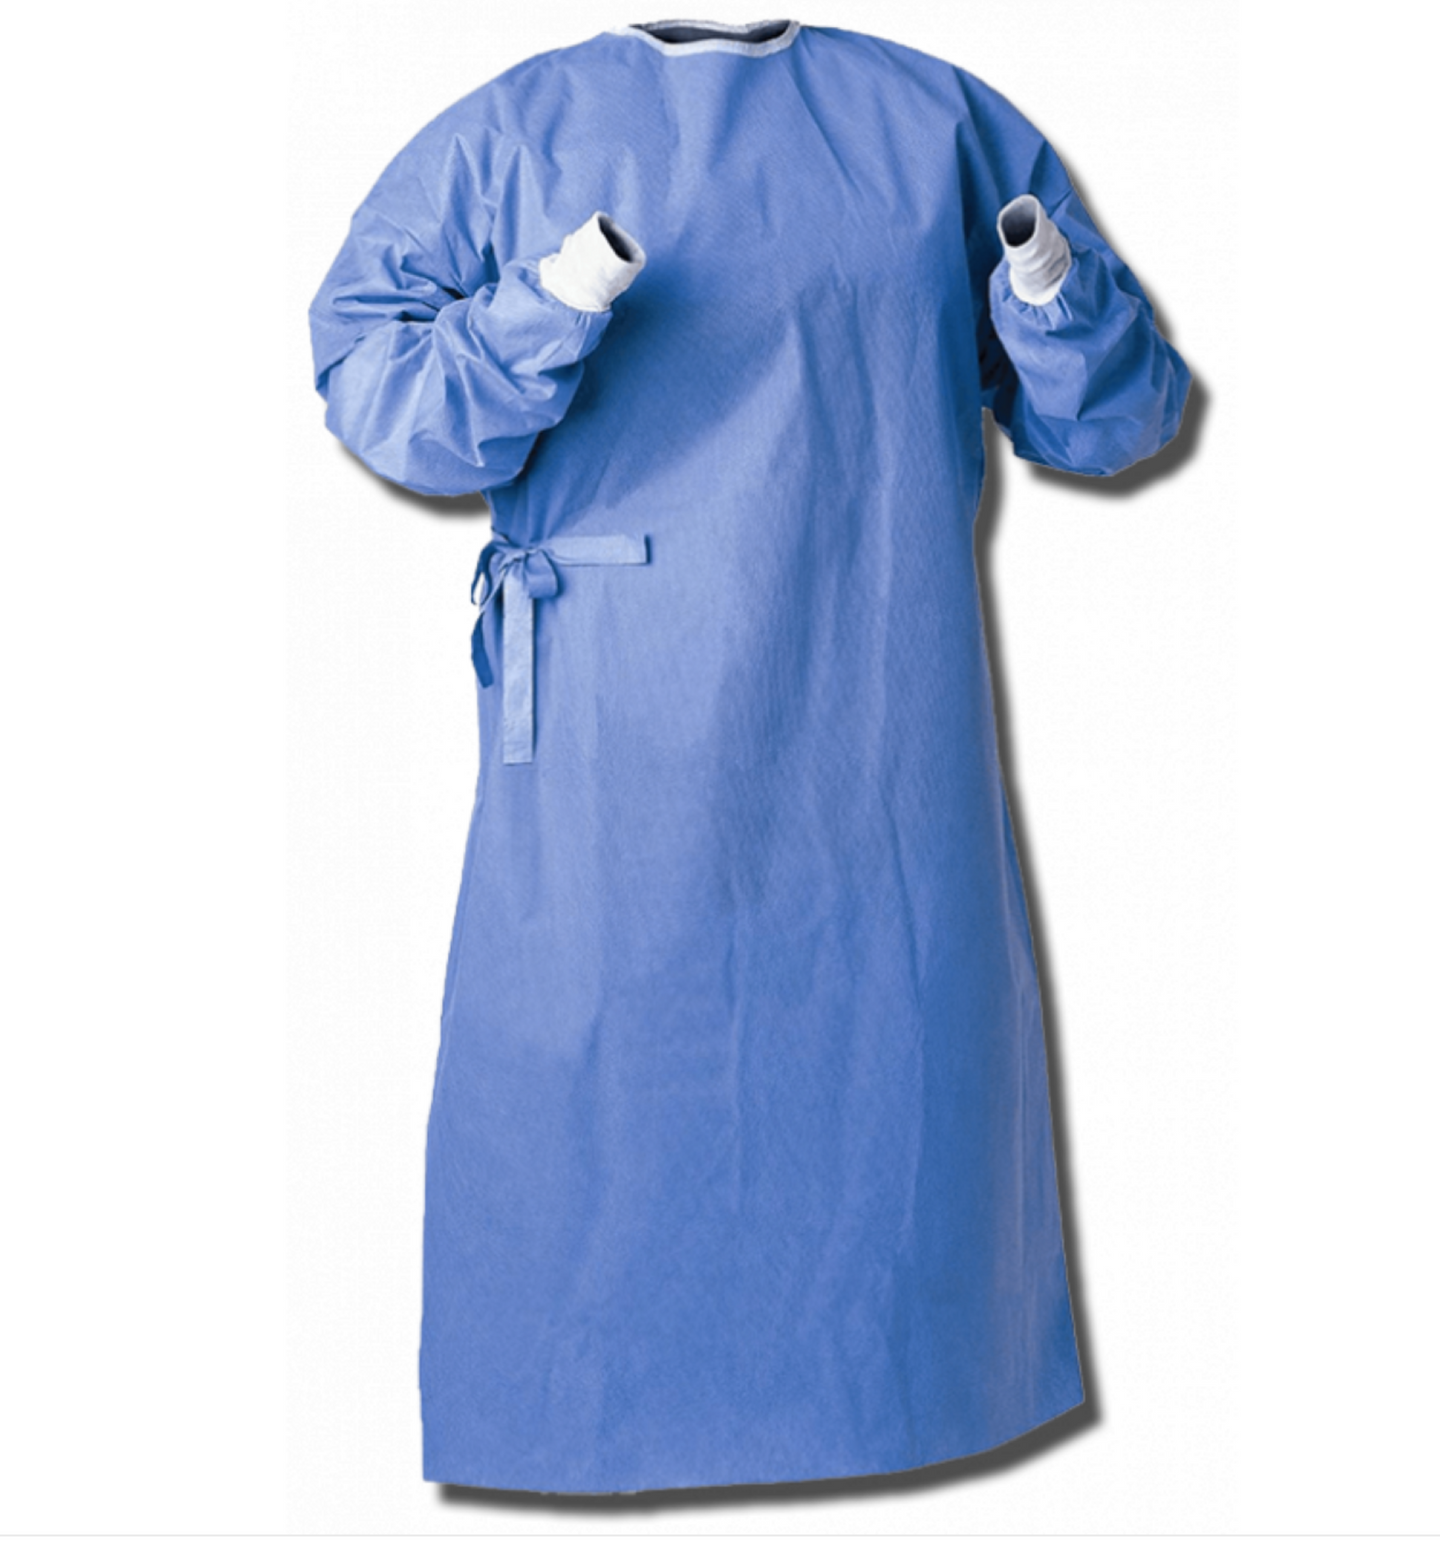 CIC Surgical Gowns - AAMI Level 3 Sterile